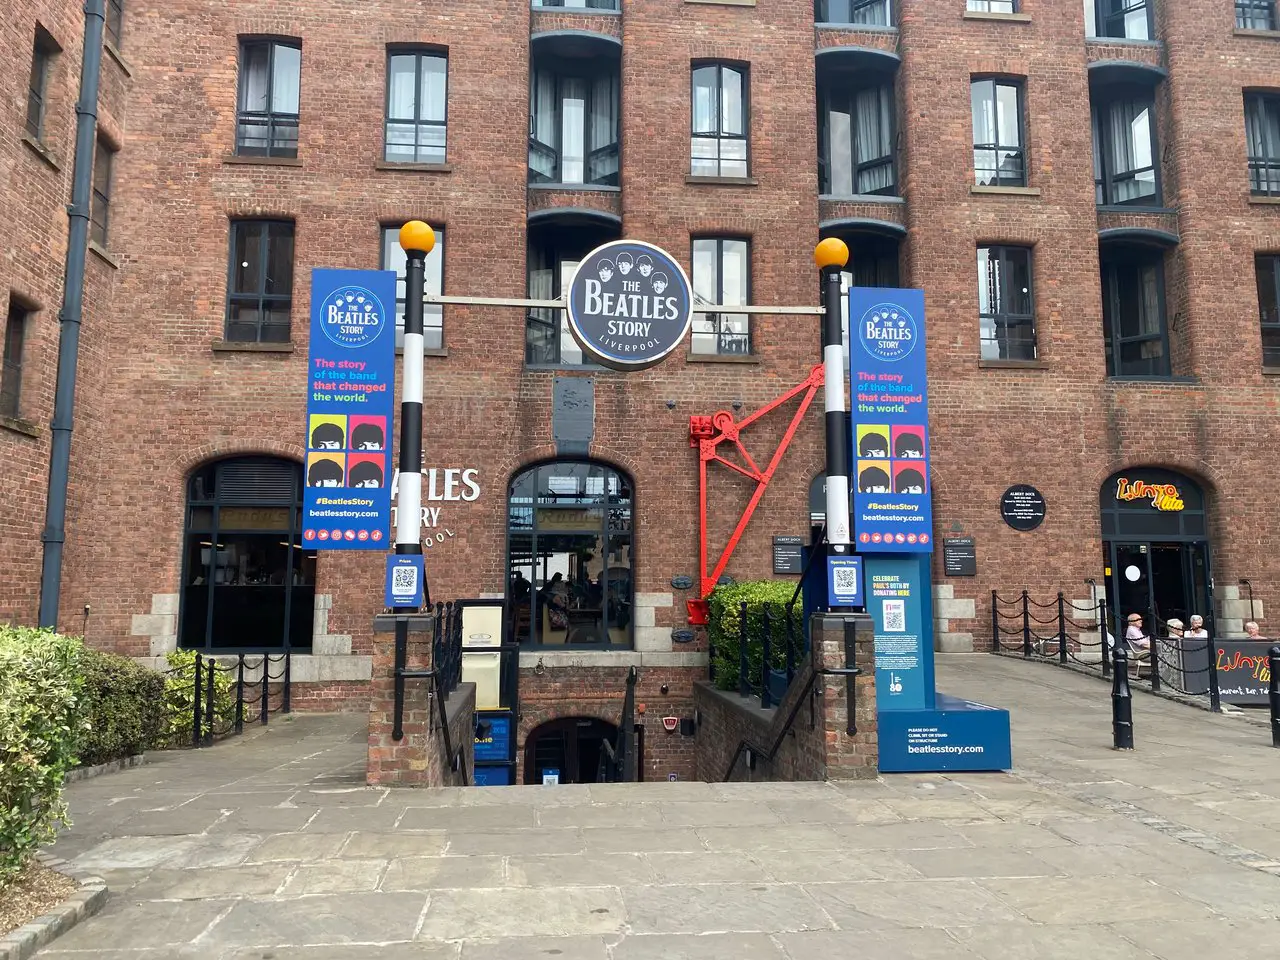 Entryway to The Beatles Story Beatles Museum at the Albert Dock, Liverpool